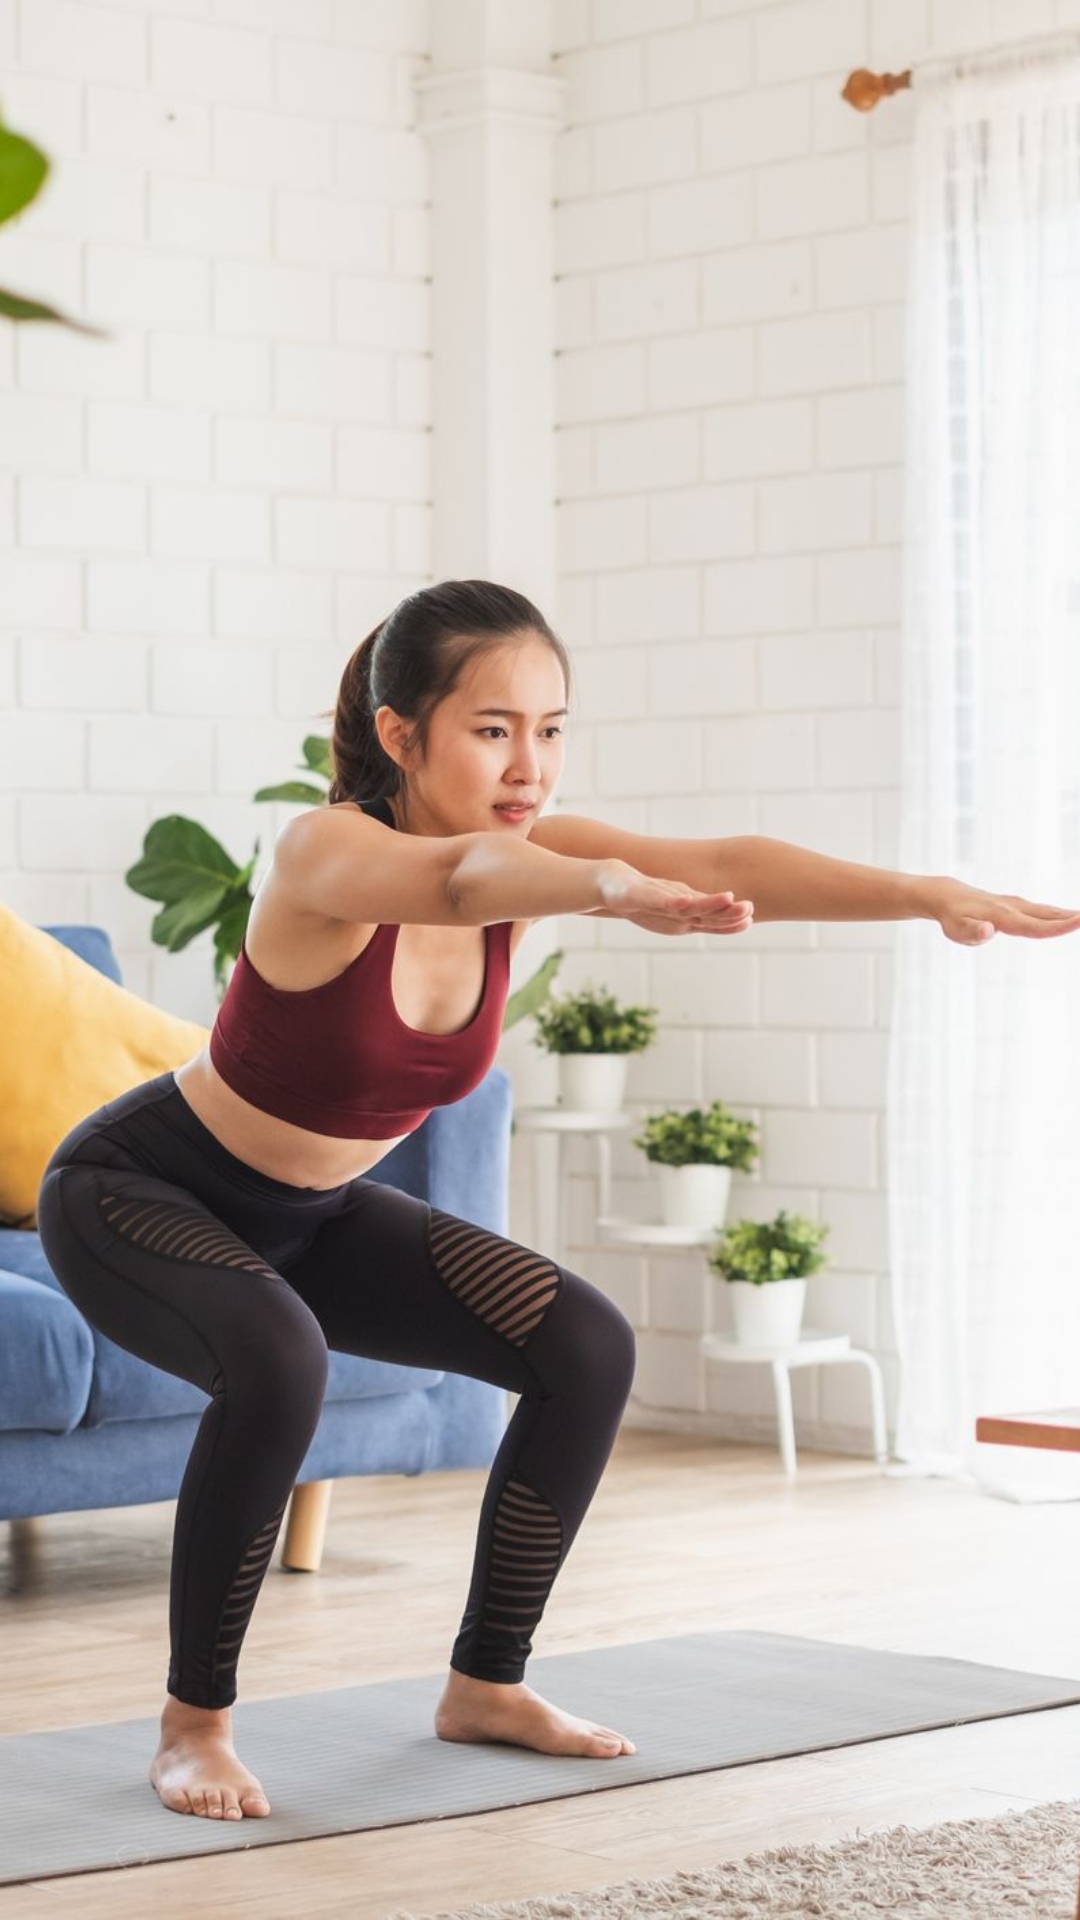 5 effective home workouts for busy professionals to stay fit